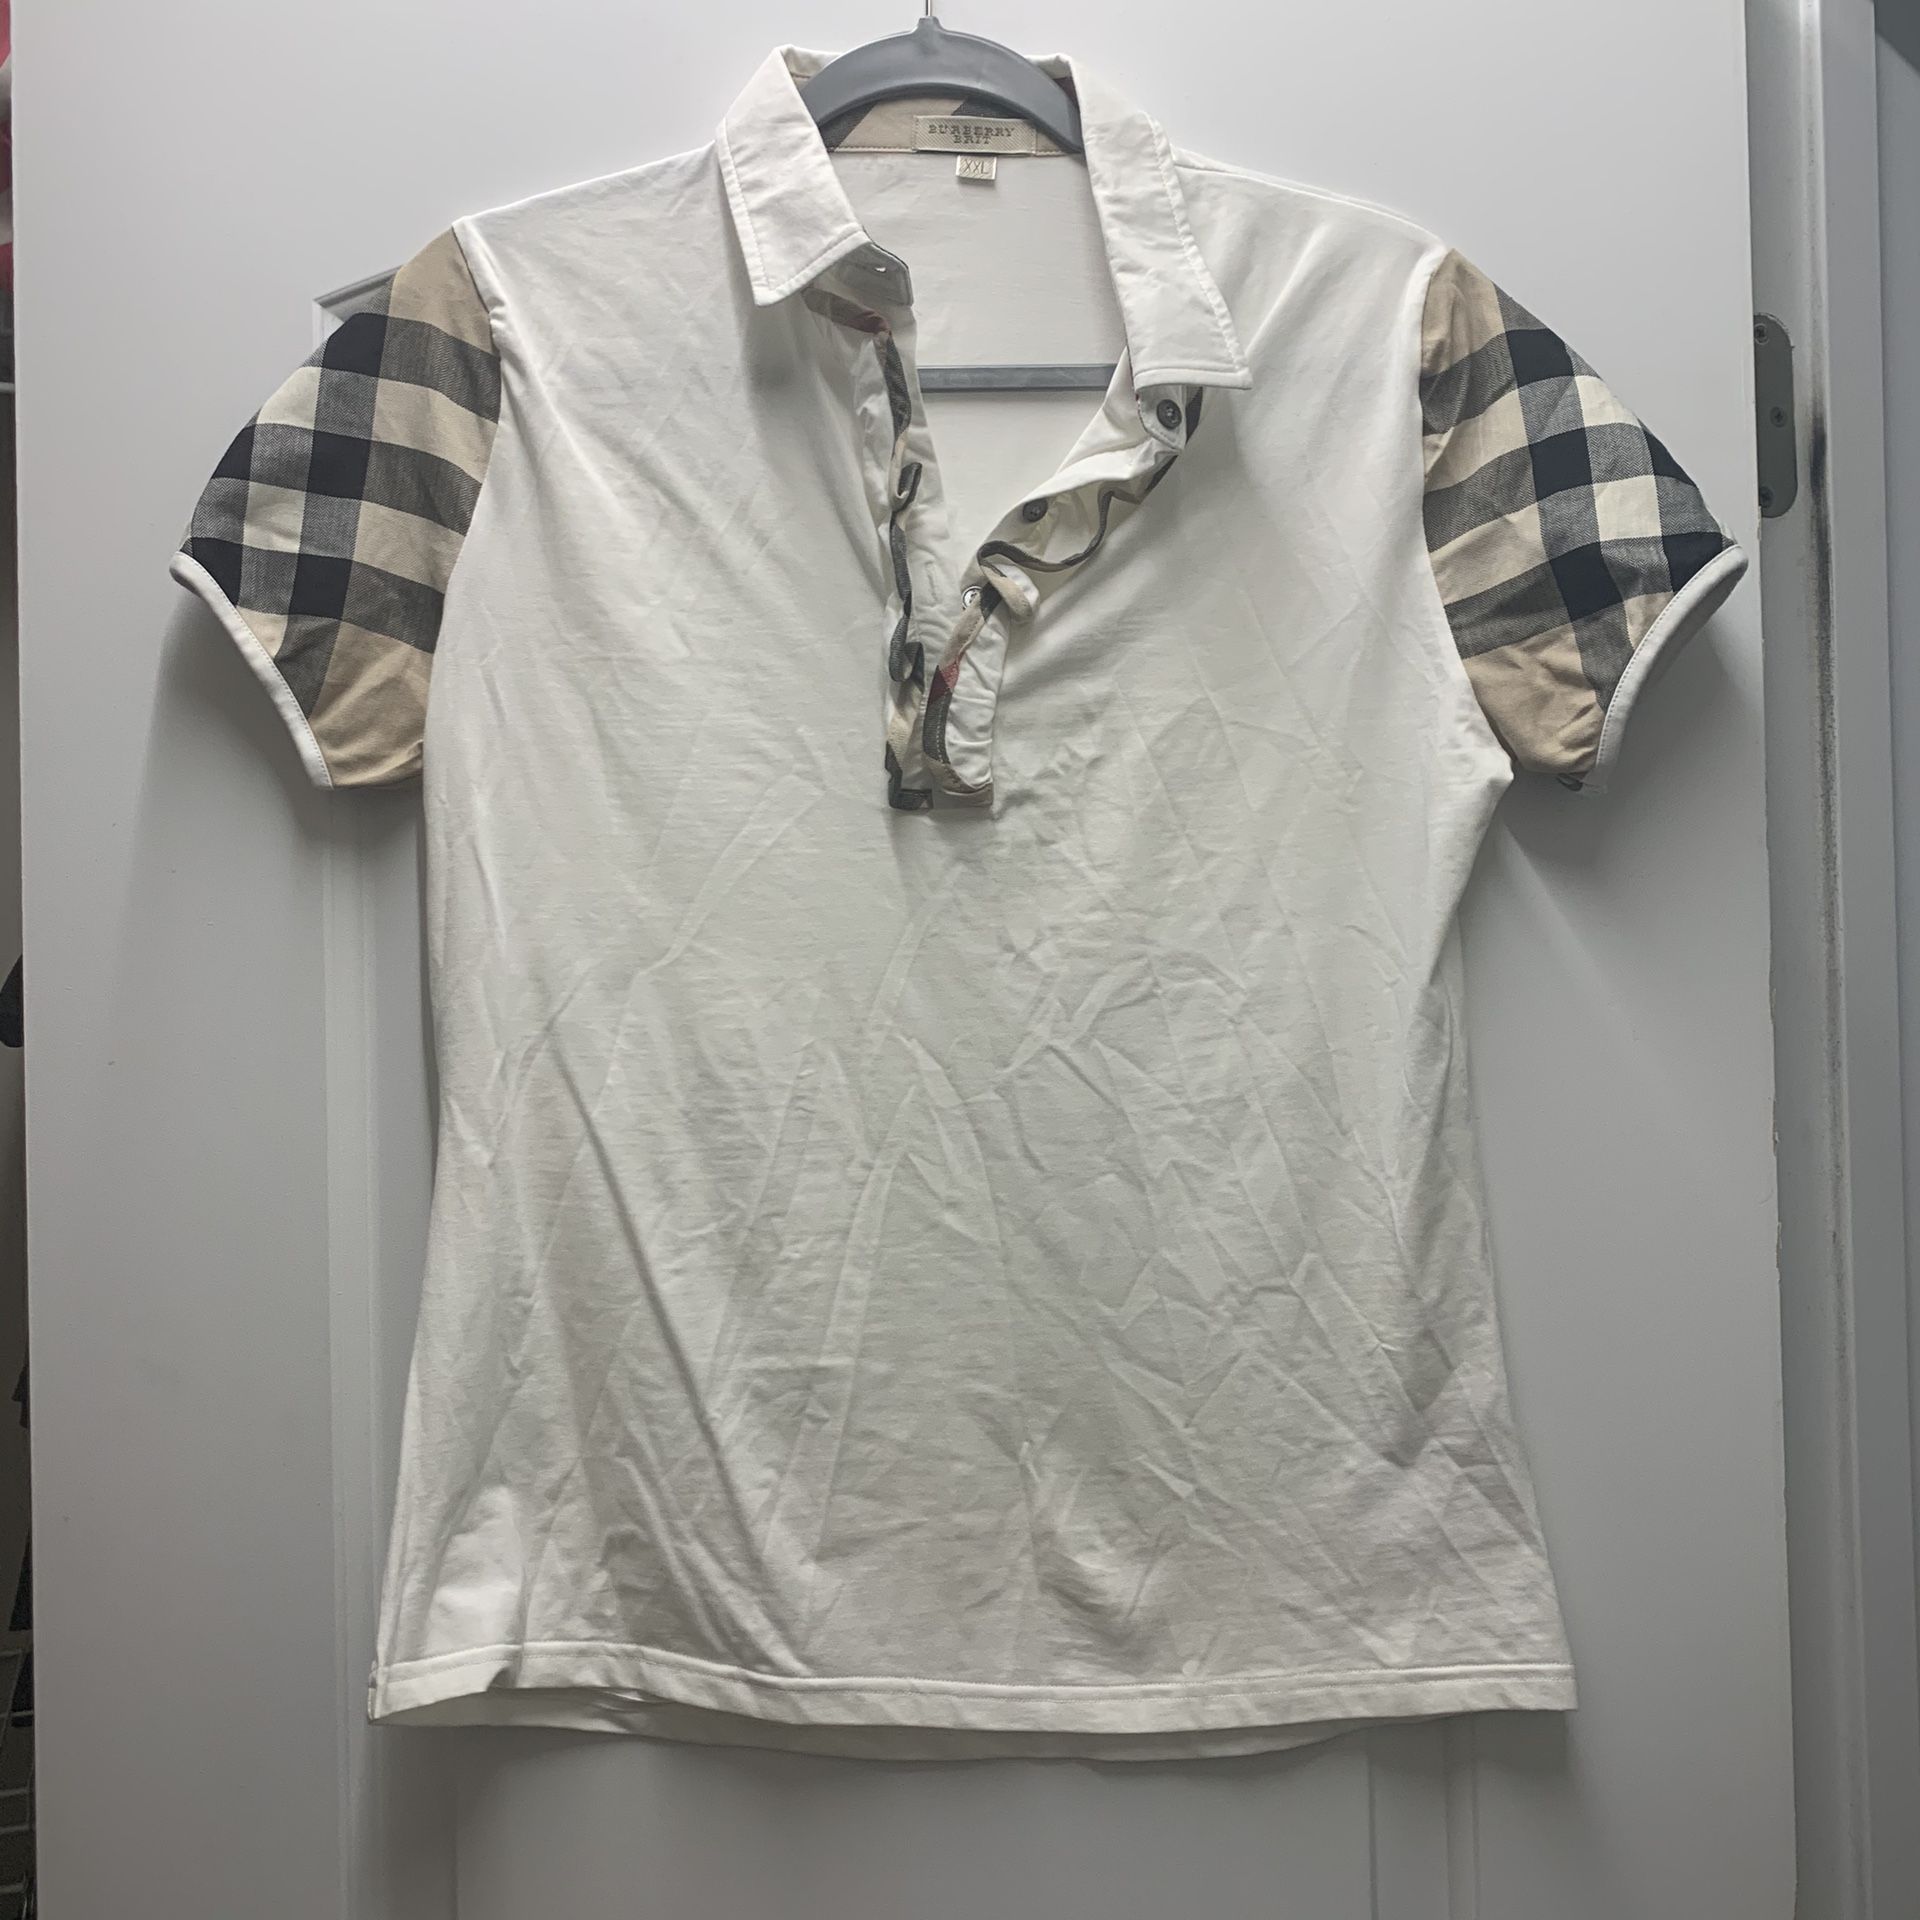 Burberry like women’s polo shirts (2 shirts for price of 1)